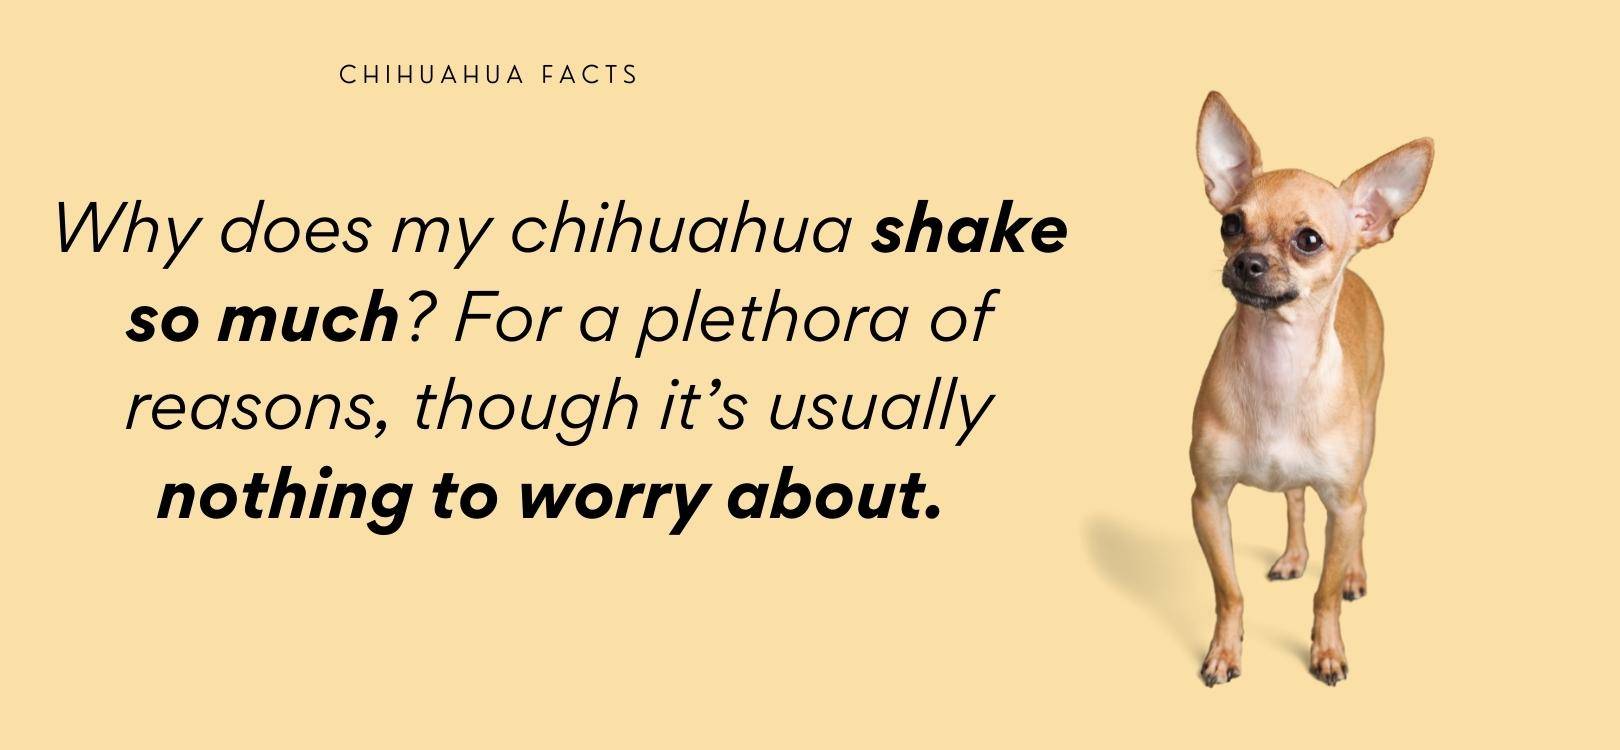 how to care for a chihuahua